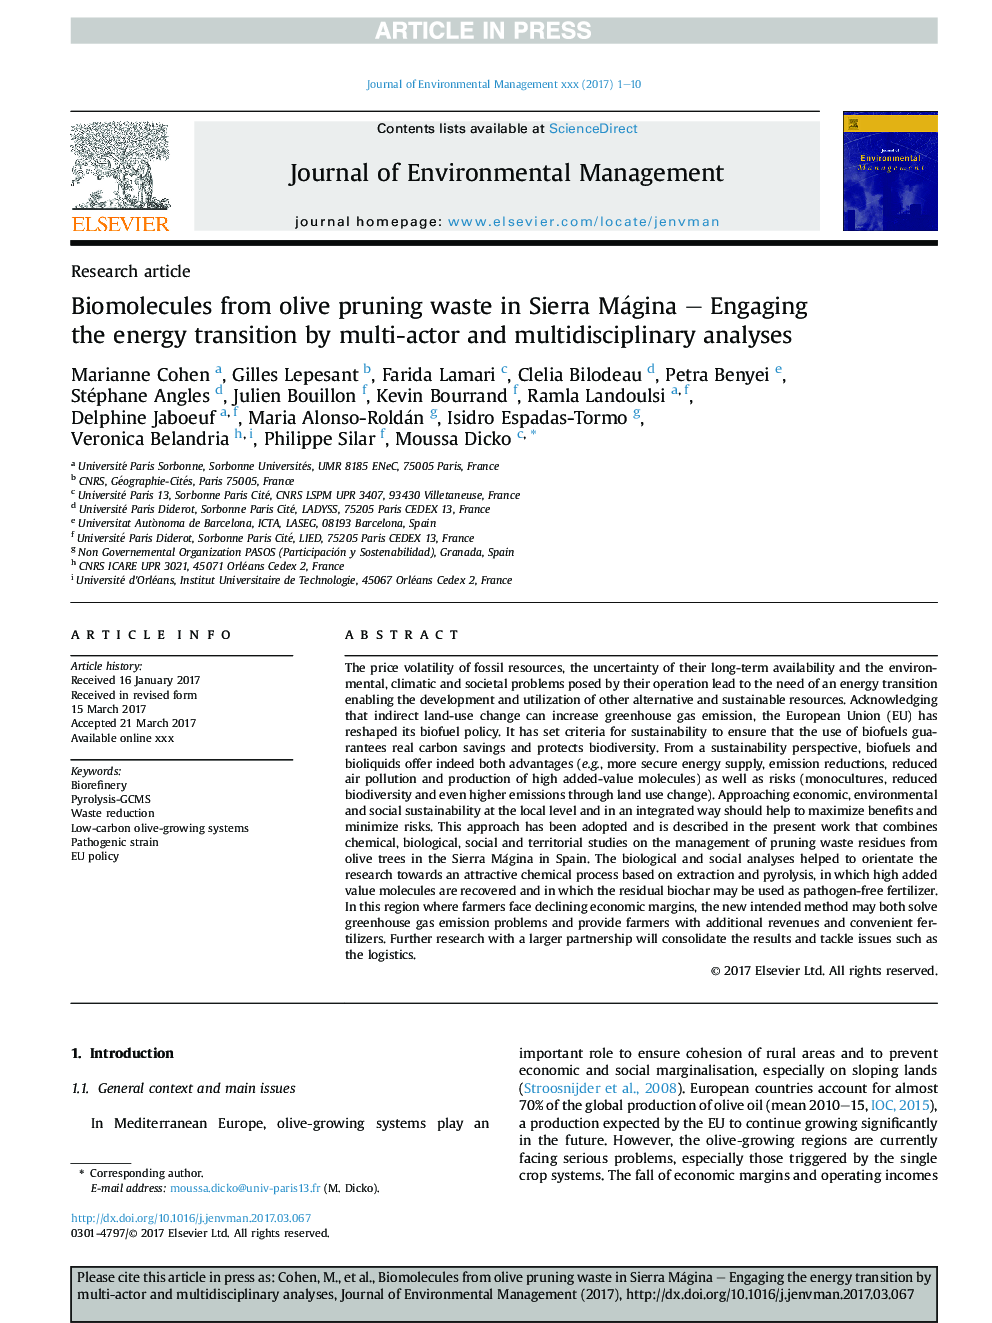 Biomolecules from olive pruning waste in Sierra Mágina - Engaging the energy transition by multi-actor and multidisciplinary analyses